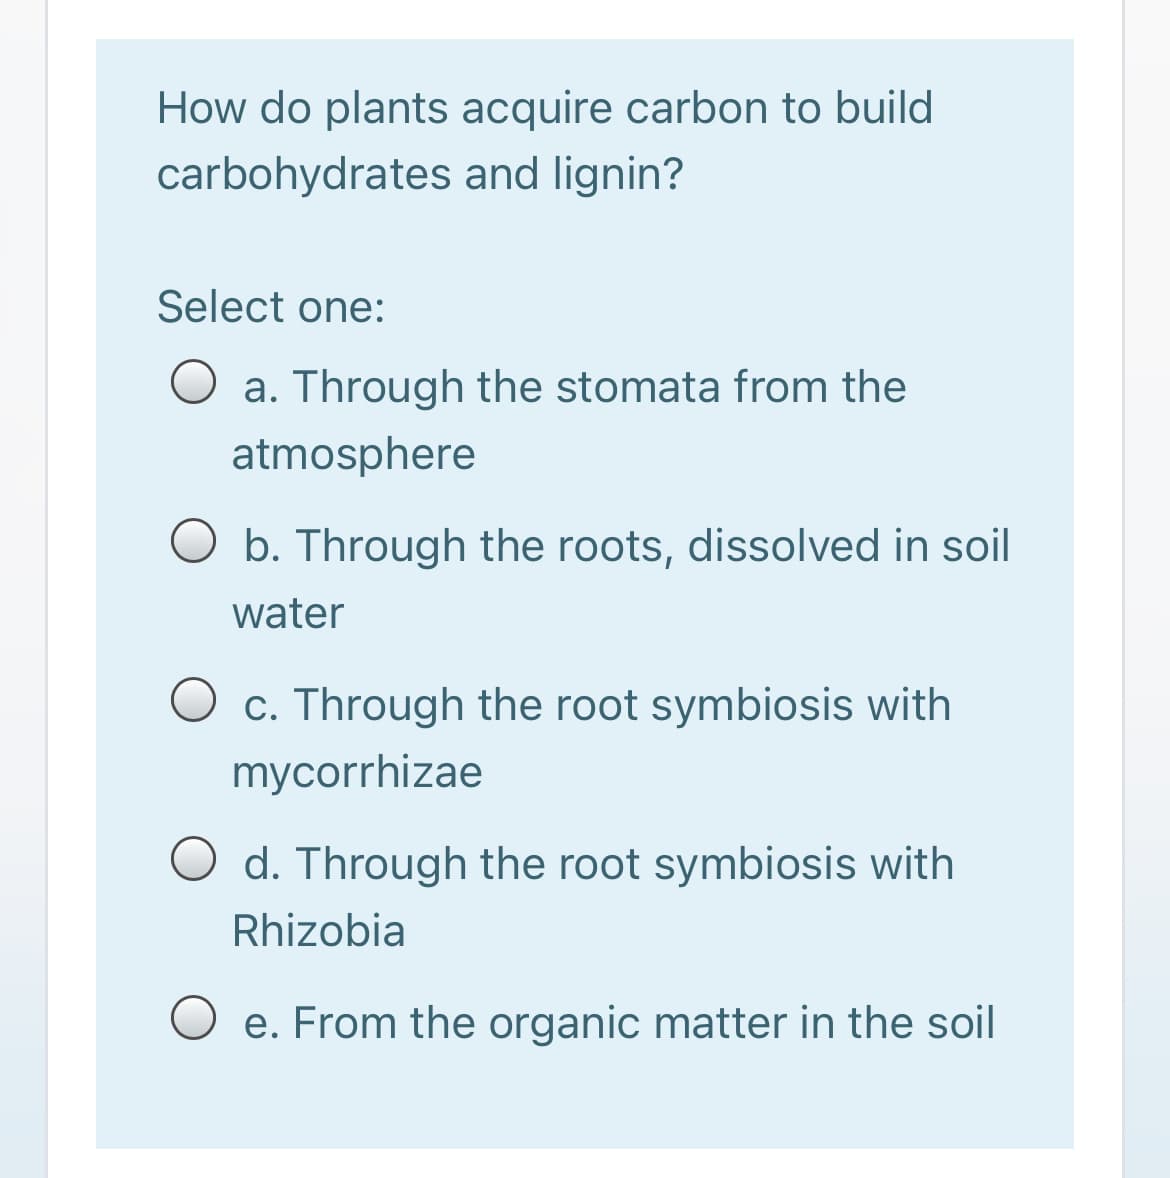 How do plants acquire carbon to build
carbohydrates and lignin?
Select one:
O a. Through the stomata from the
atmosphere
O b. Through the roots, dissolved in soil
water
c. Through the root symbiosis with
mycorrhizae
O d. Through the root symbiosis with
Rhizobia
e. From the organic matter in the soil
